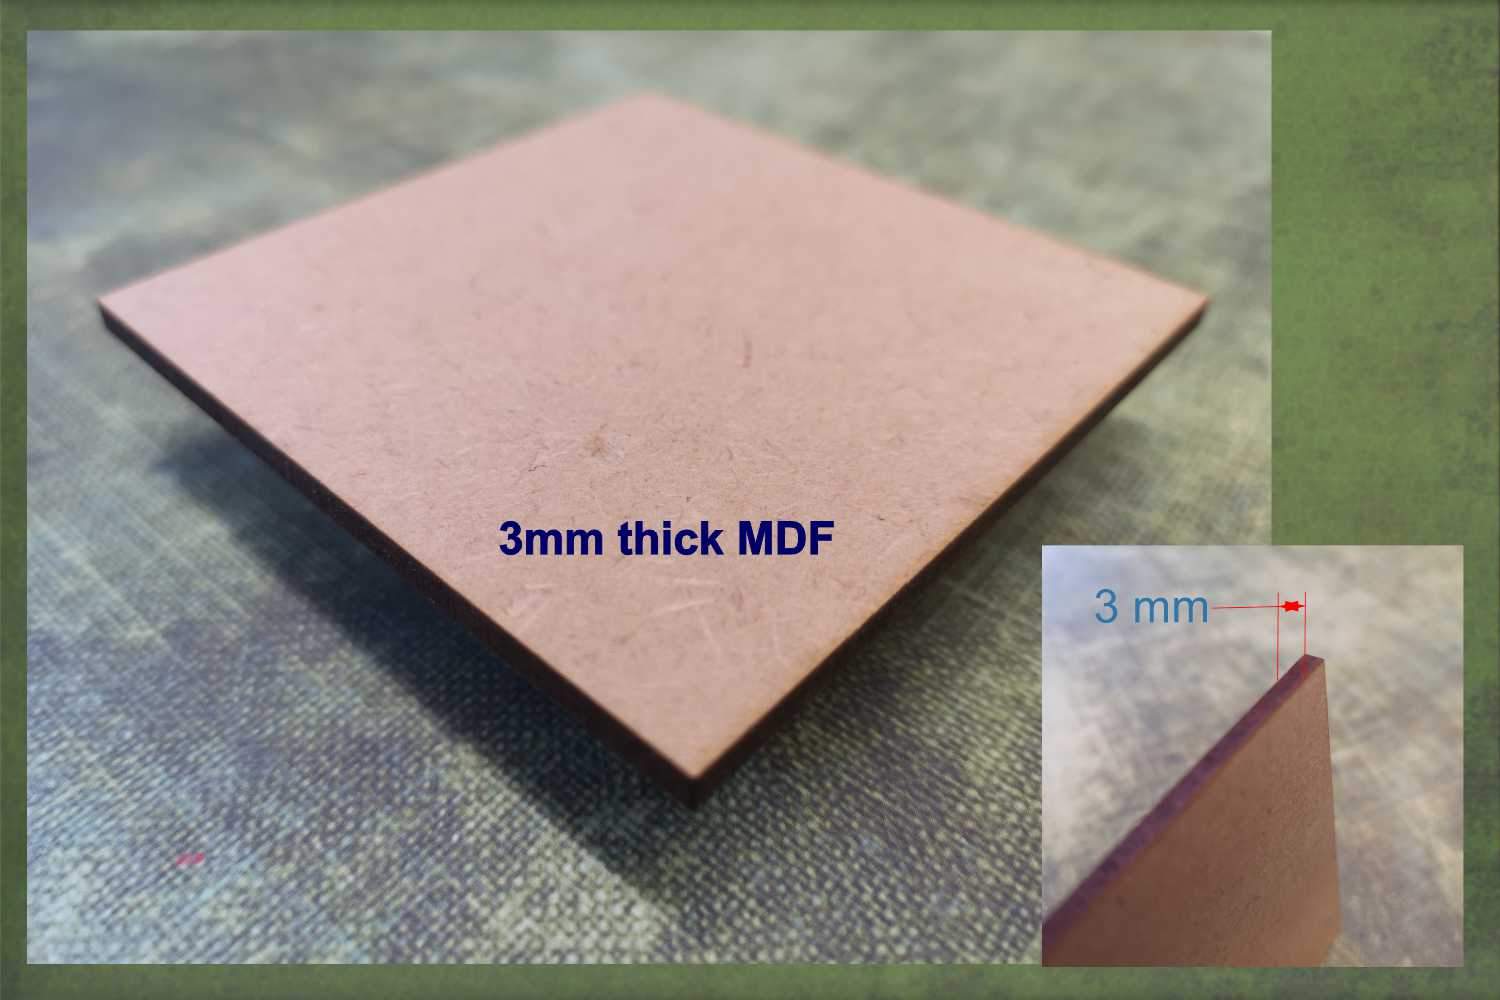 3mm thick MDF used to make the Playing card symbols cut-outs ready for crafting